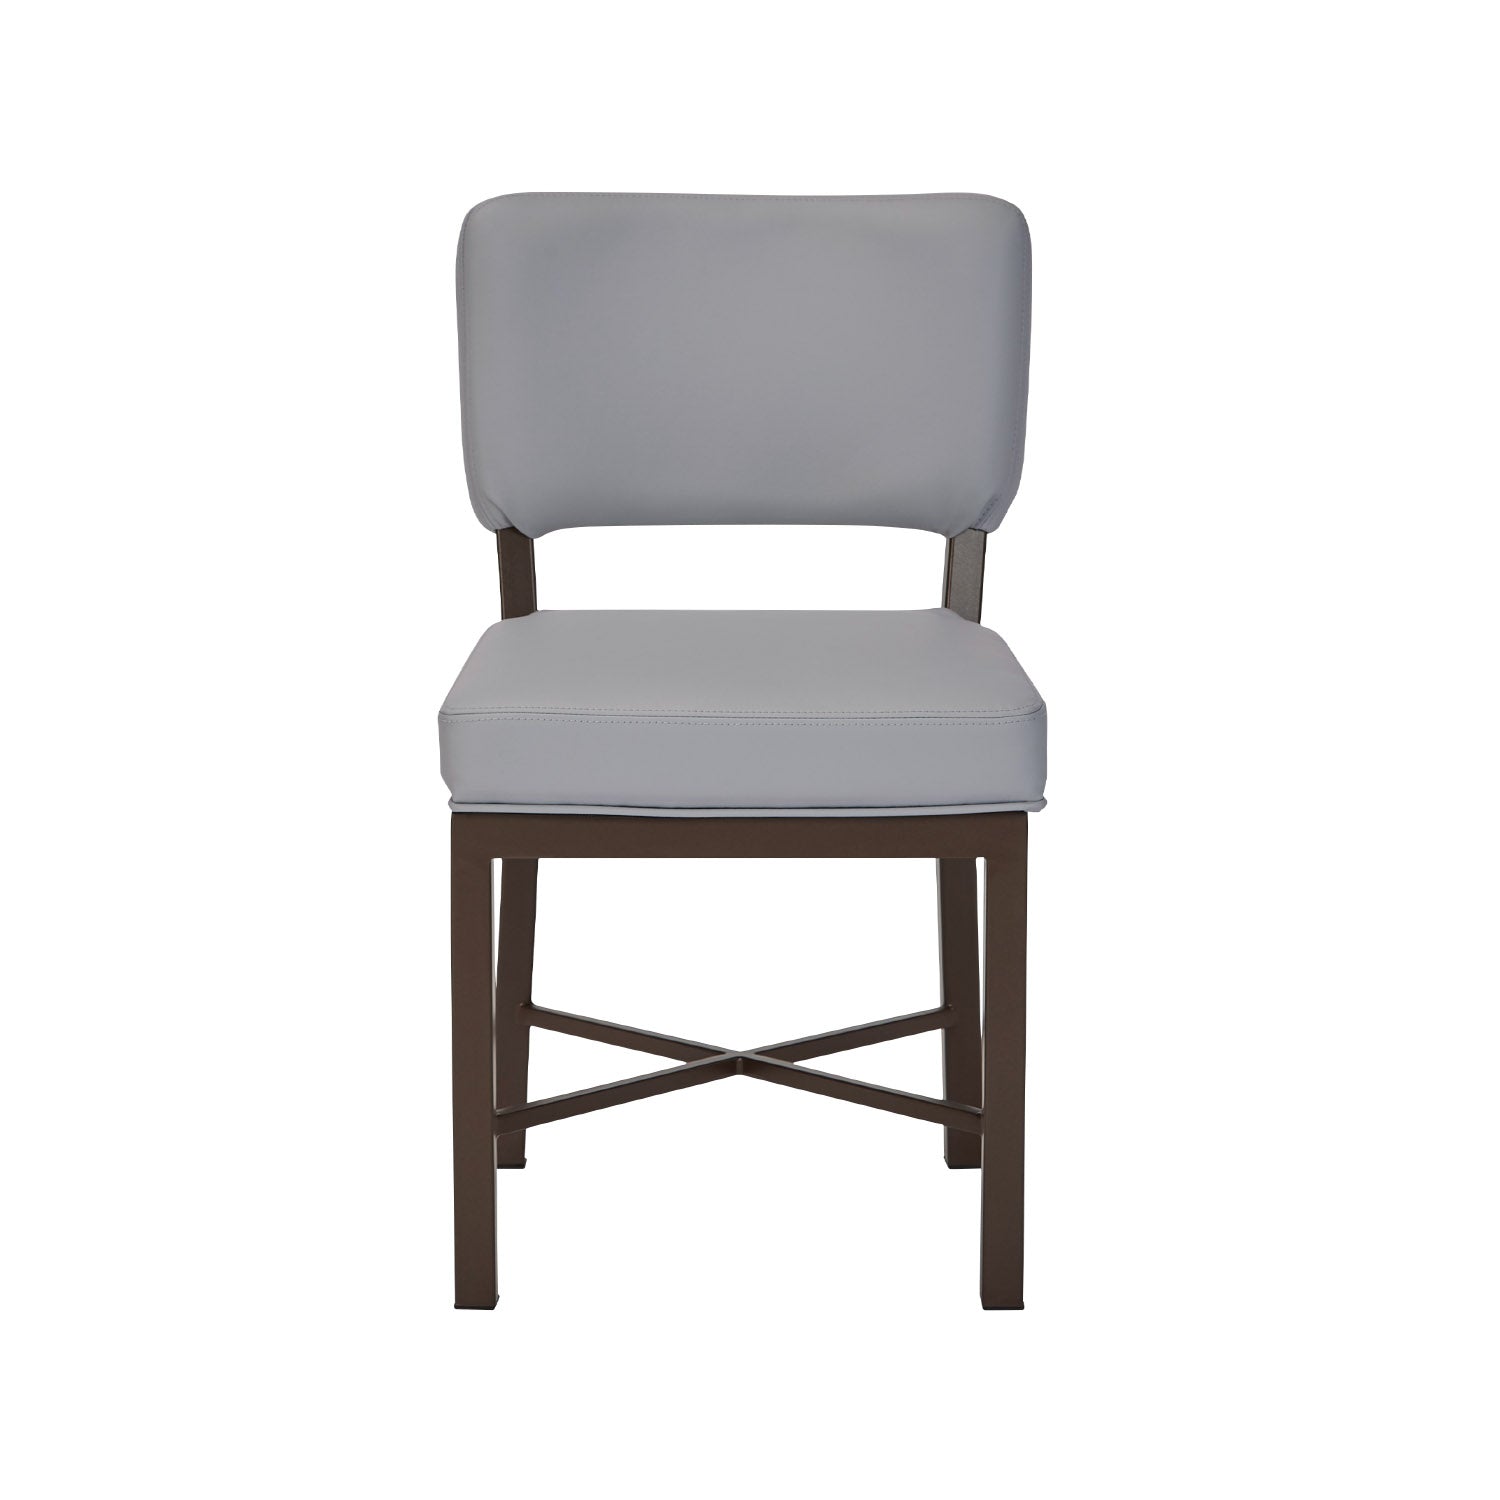 Wesley Allen Miami Chair with Dillon Steel Vinyl in Caapucino Finish. Front View.